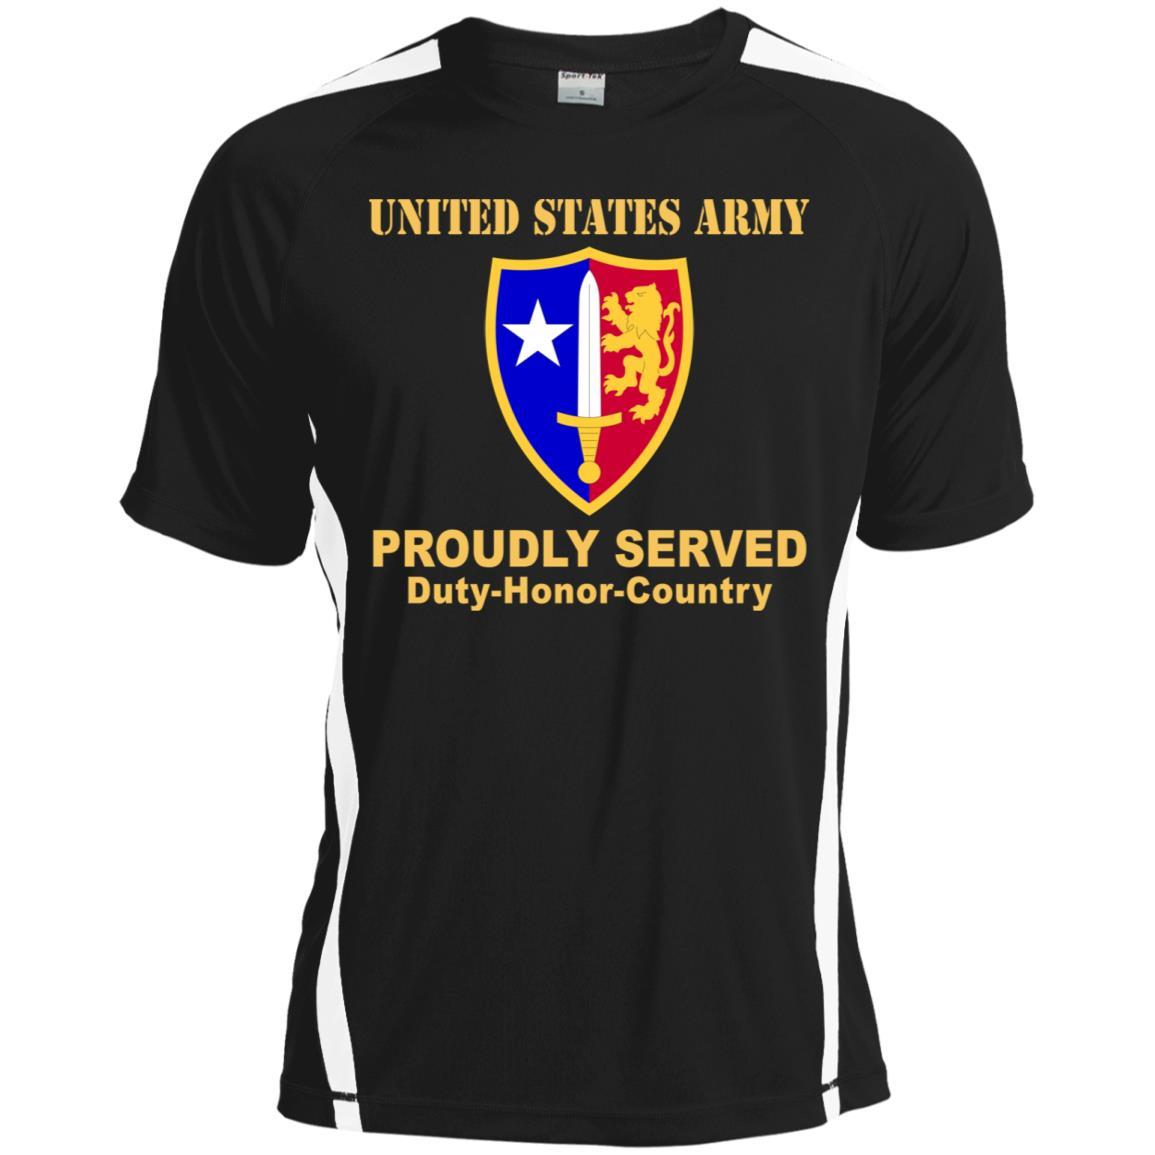 US ARMY USA NORTH ATLANTIC TREATY ORGANIZATION (NATO)- Proudly Served T-Shirt On Front For Men-TShirt-Army-Veterans Nation